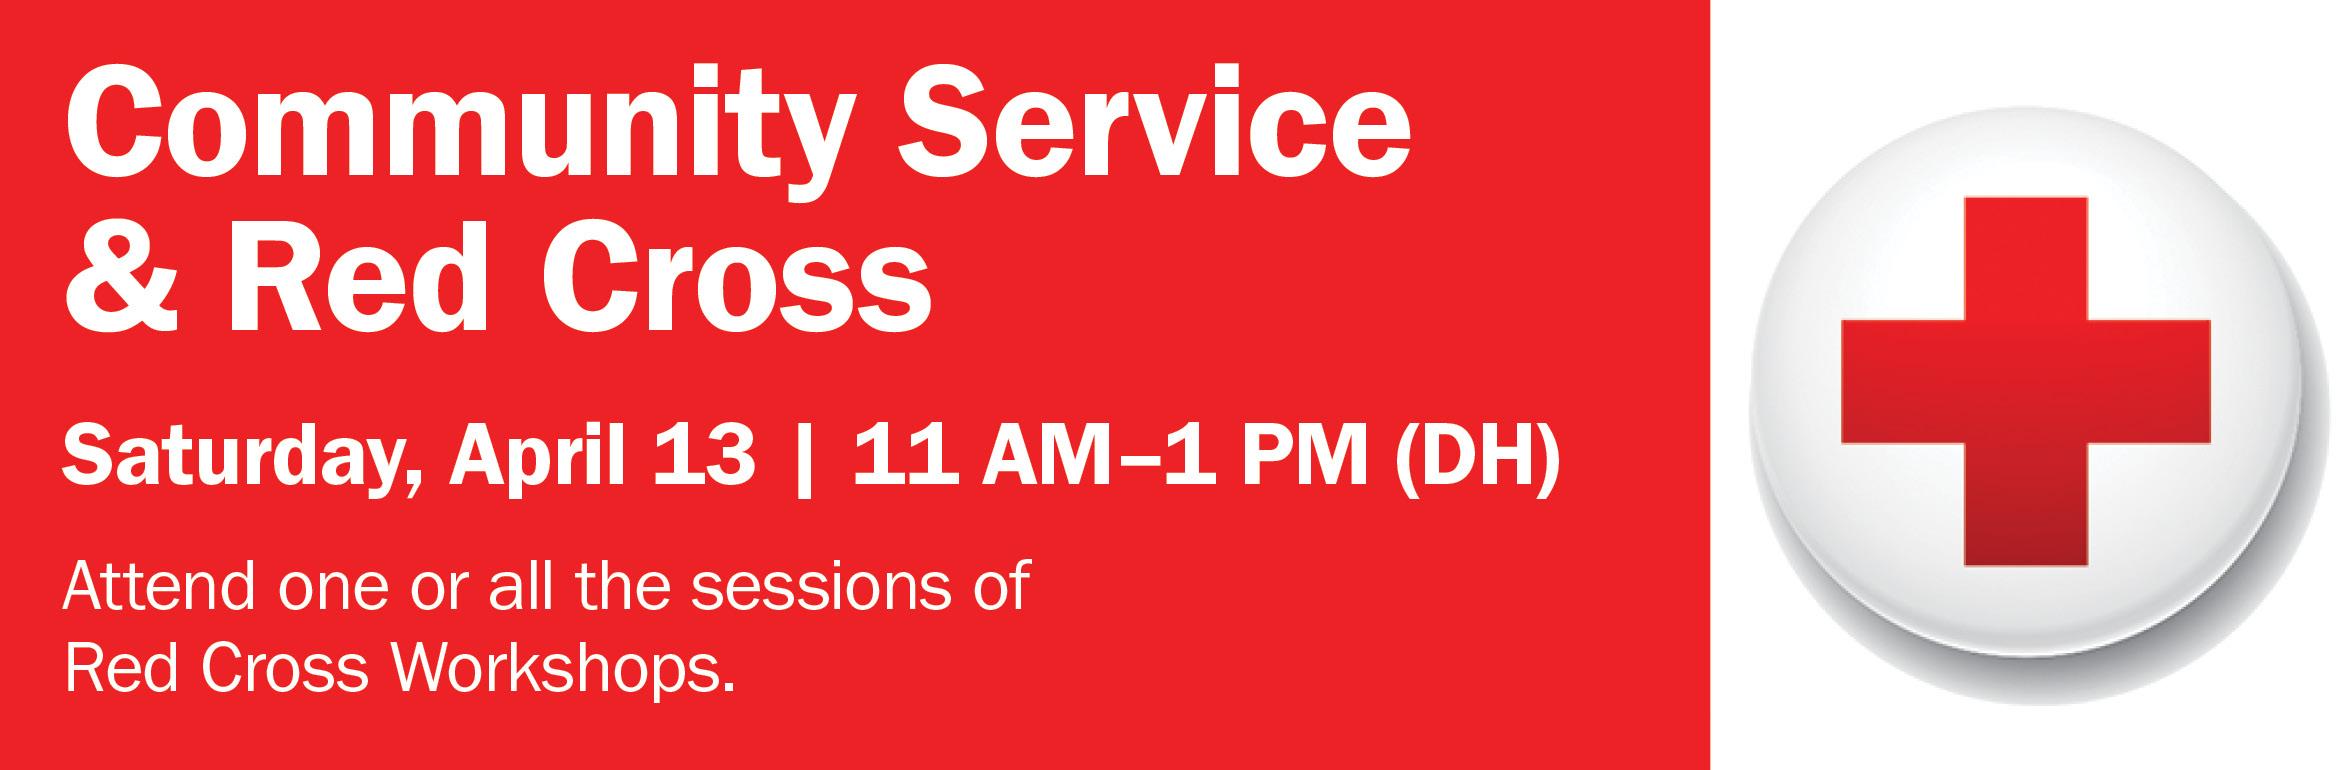 Community Service & Red Cross. Saturday, April 13 | 11 AM–1 PM (DH). Attend one or all the sessions of Red Cross Workshops.